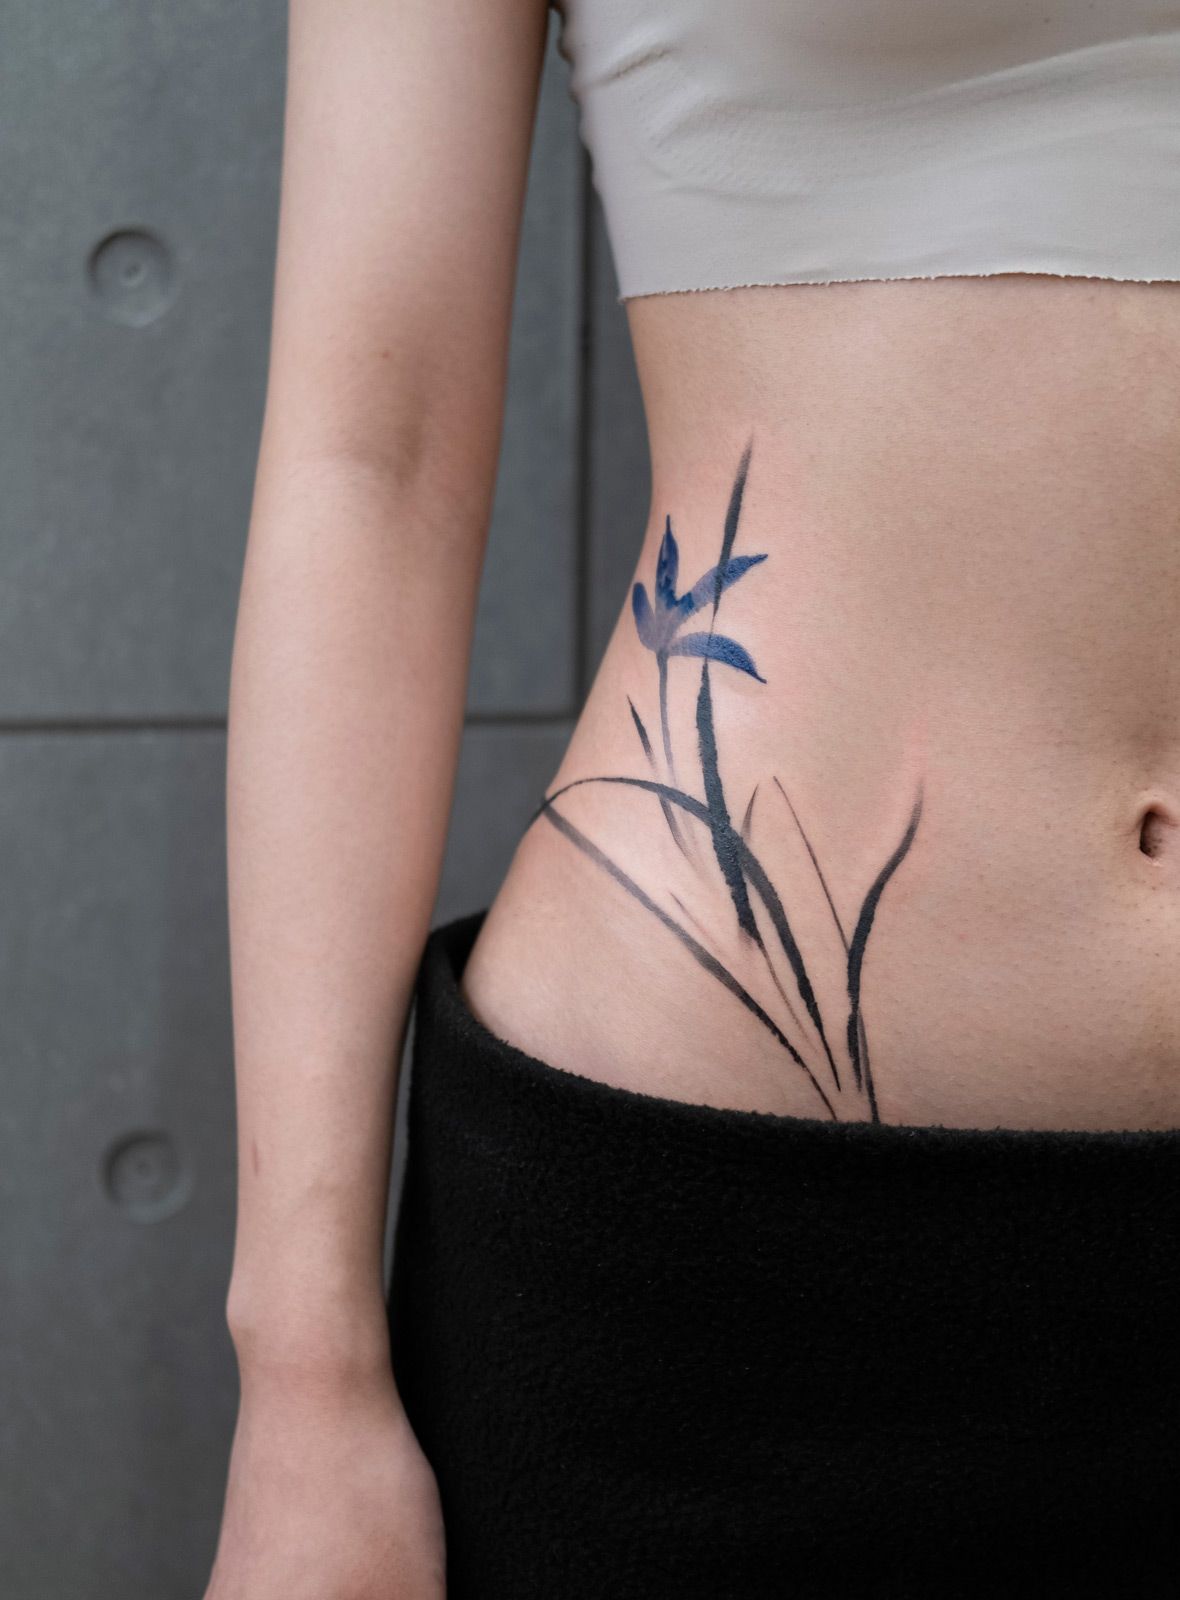 Express Your Feminine Side with These
Girly Tattoo Ideas